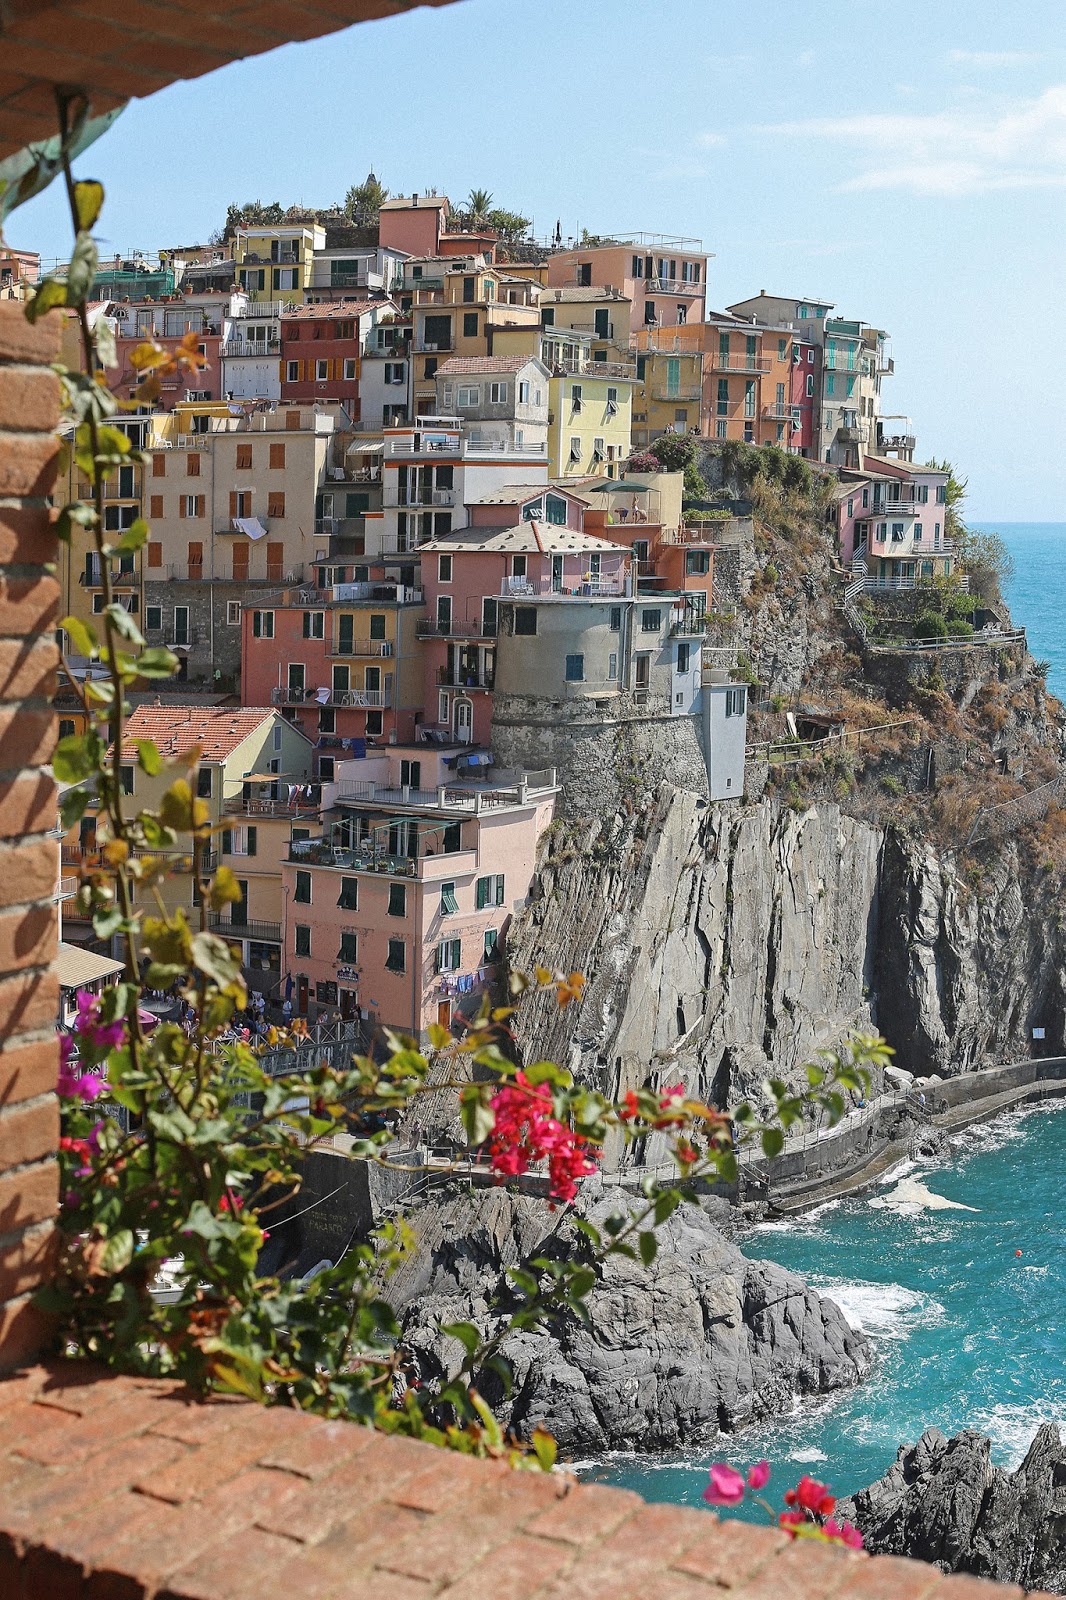 20 Days 20 Cities 6 Countries Part 12 Cinque Terre Italy Posh Broke Bored